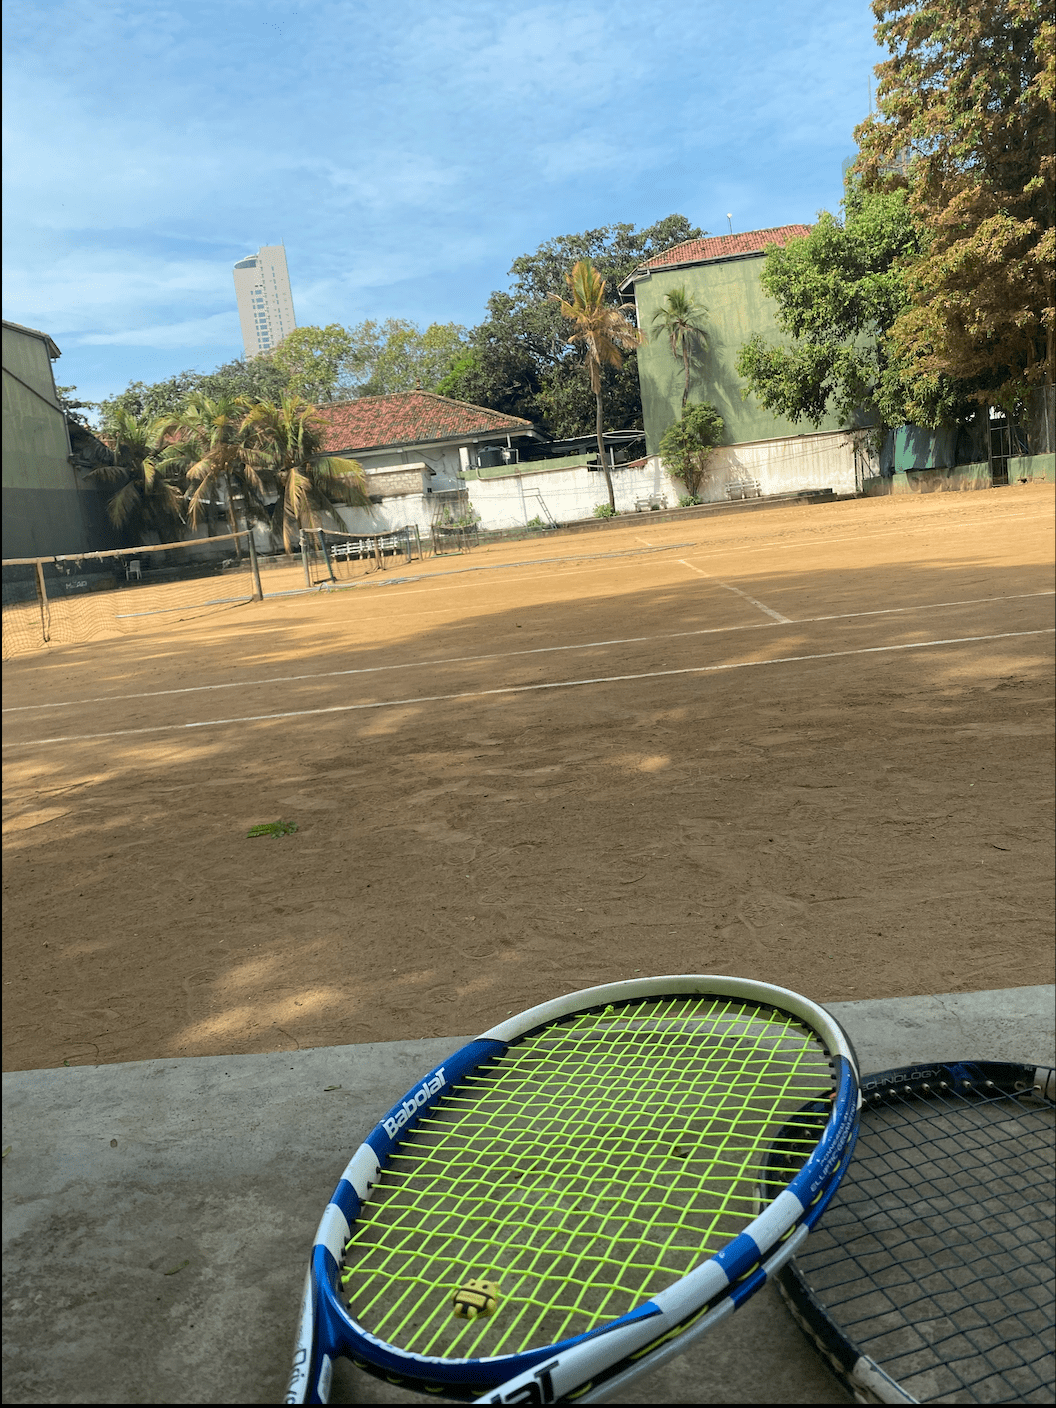 Trying tennis for the first time